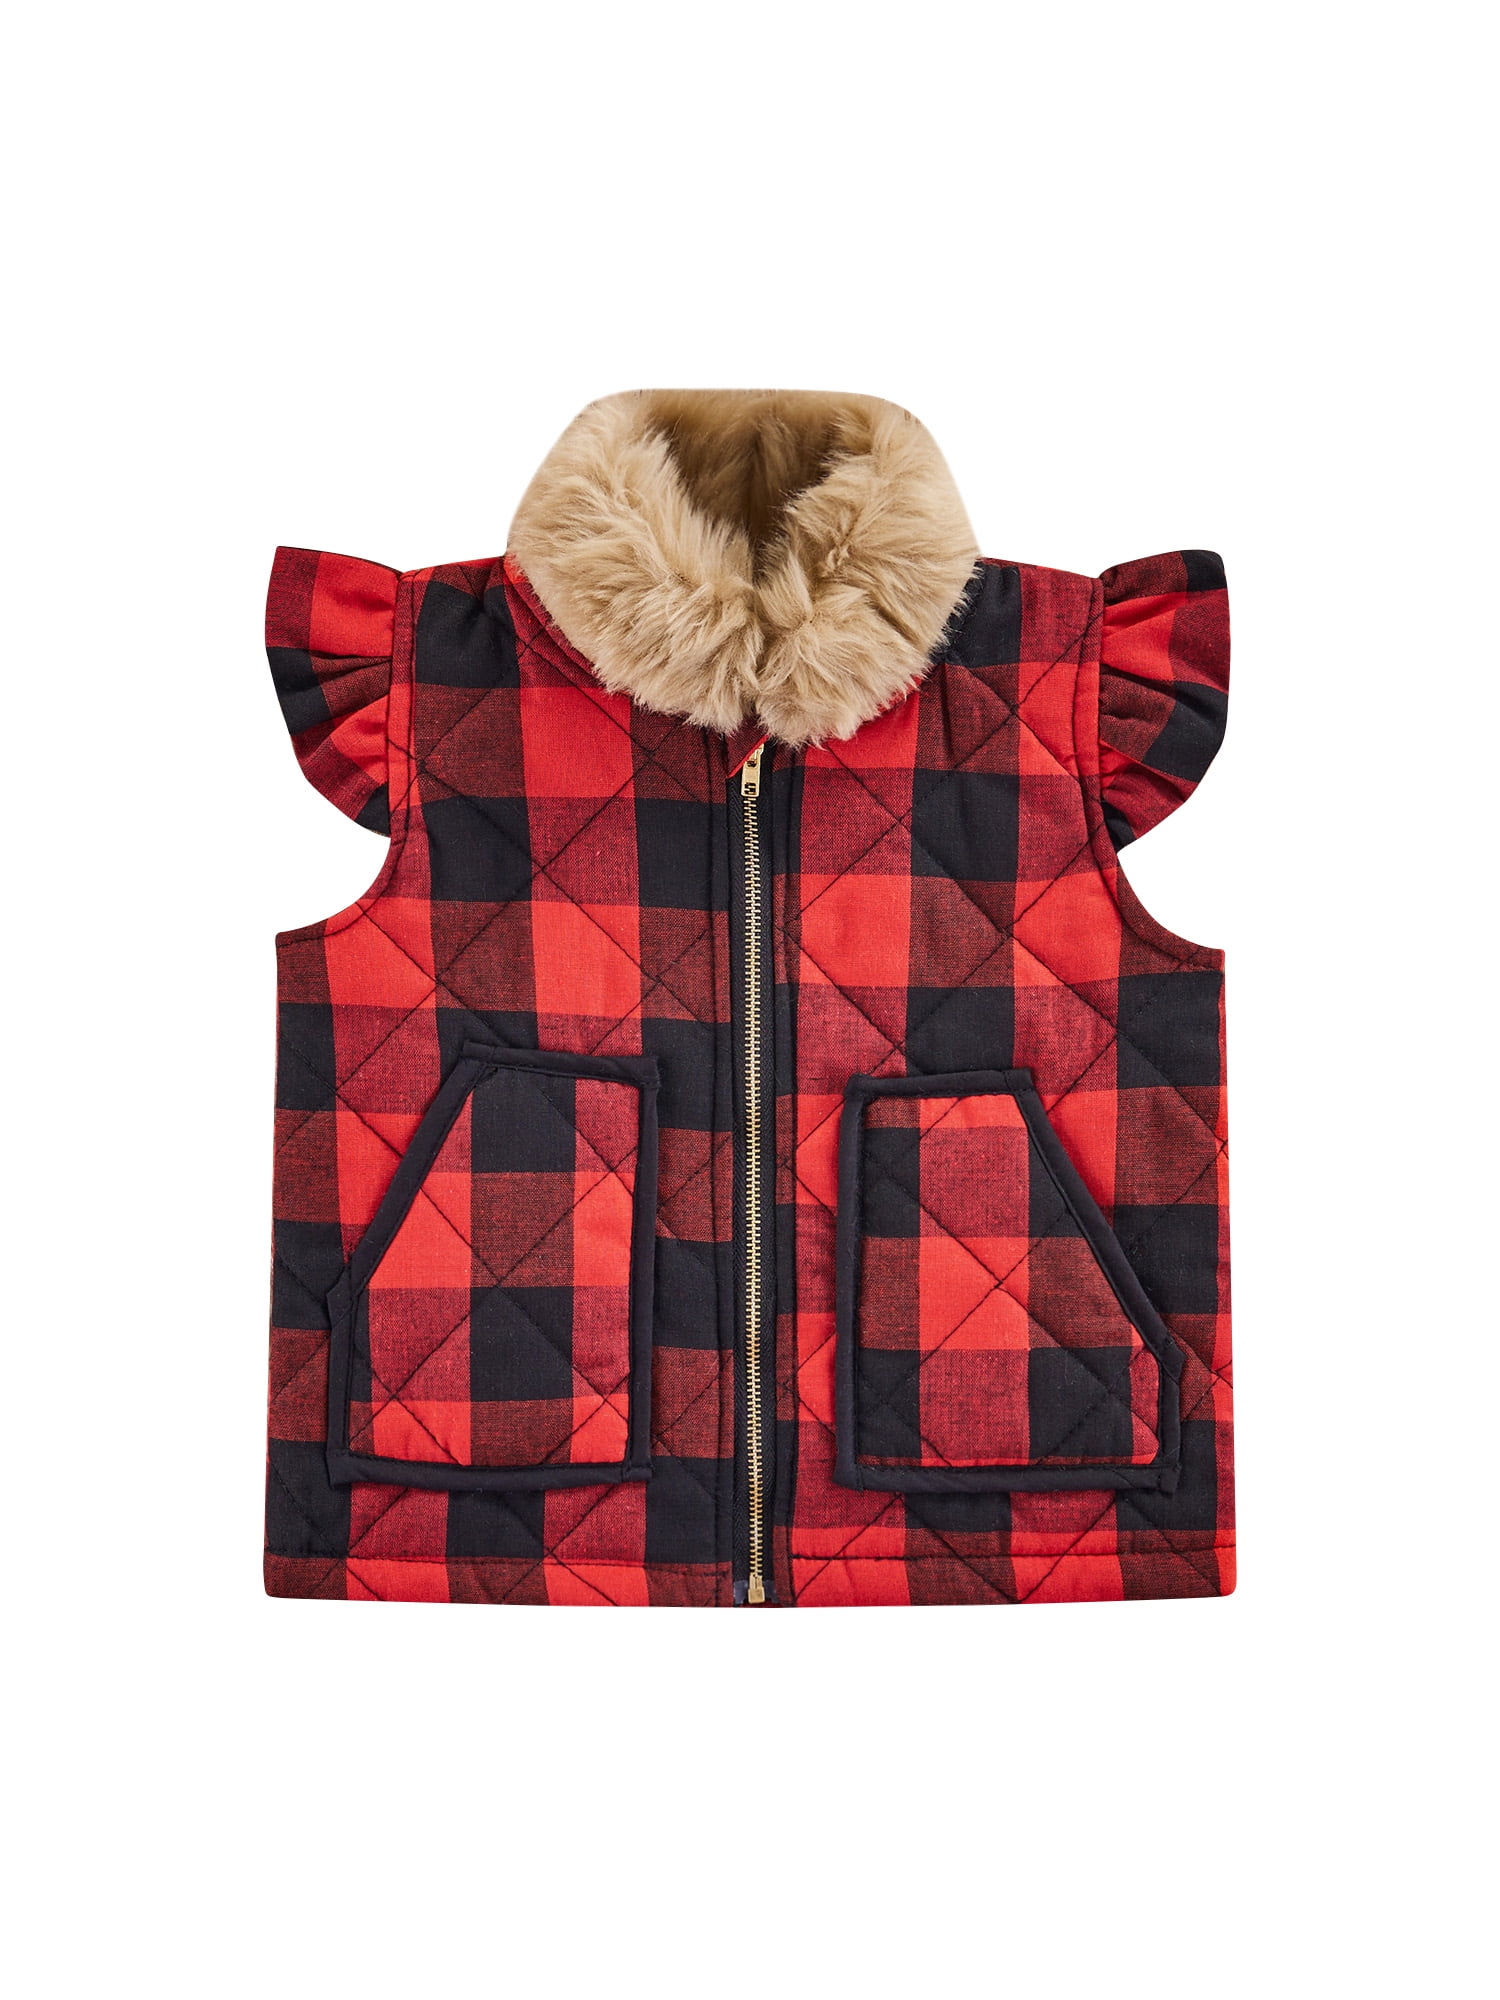 Blcak Plaid Vests, 4-5T Toddler Baby Girls Winter Warm Vest Clothes Buffalo Plaid Jacket Kids Puffer Quilted Gilet Coat